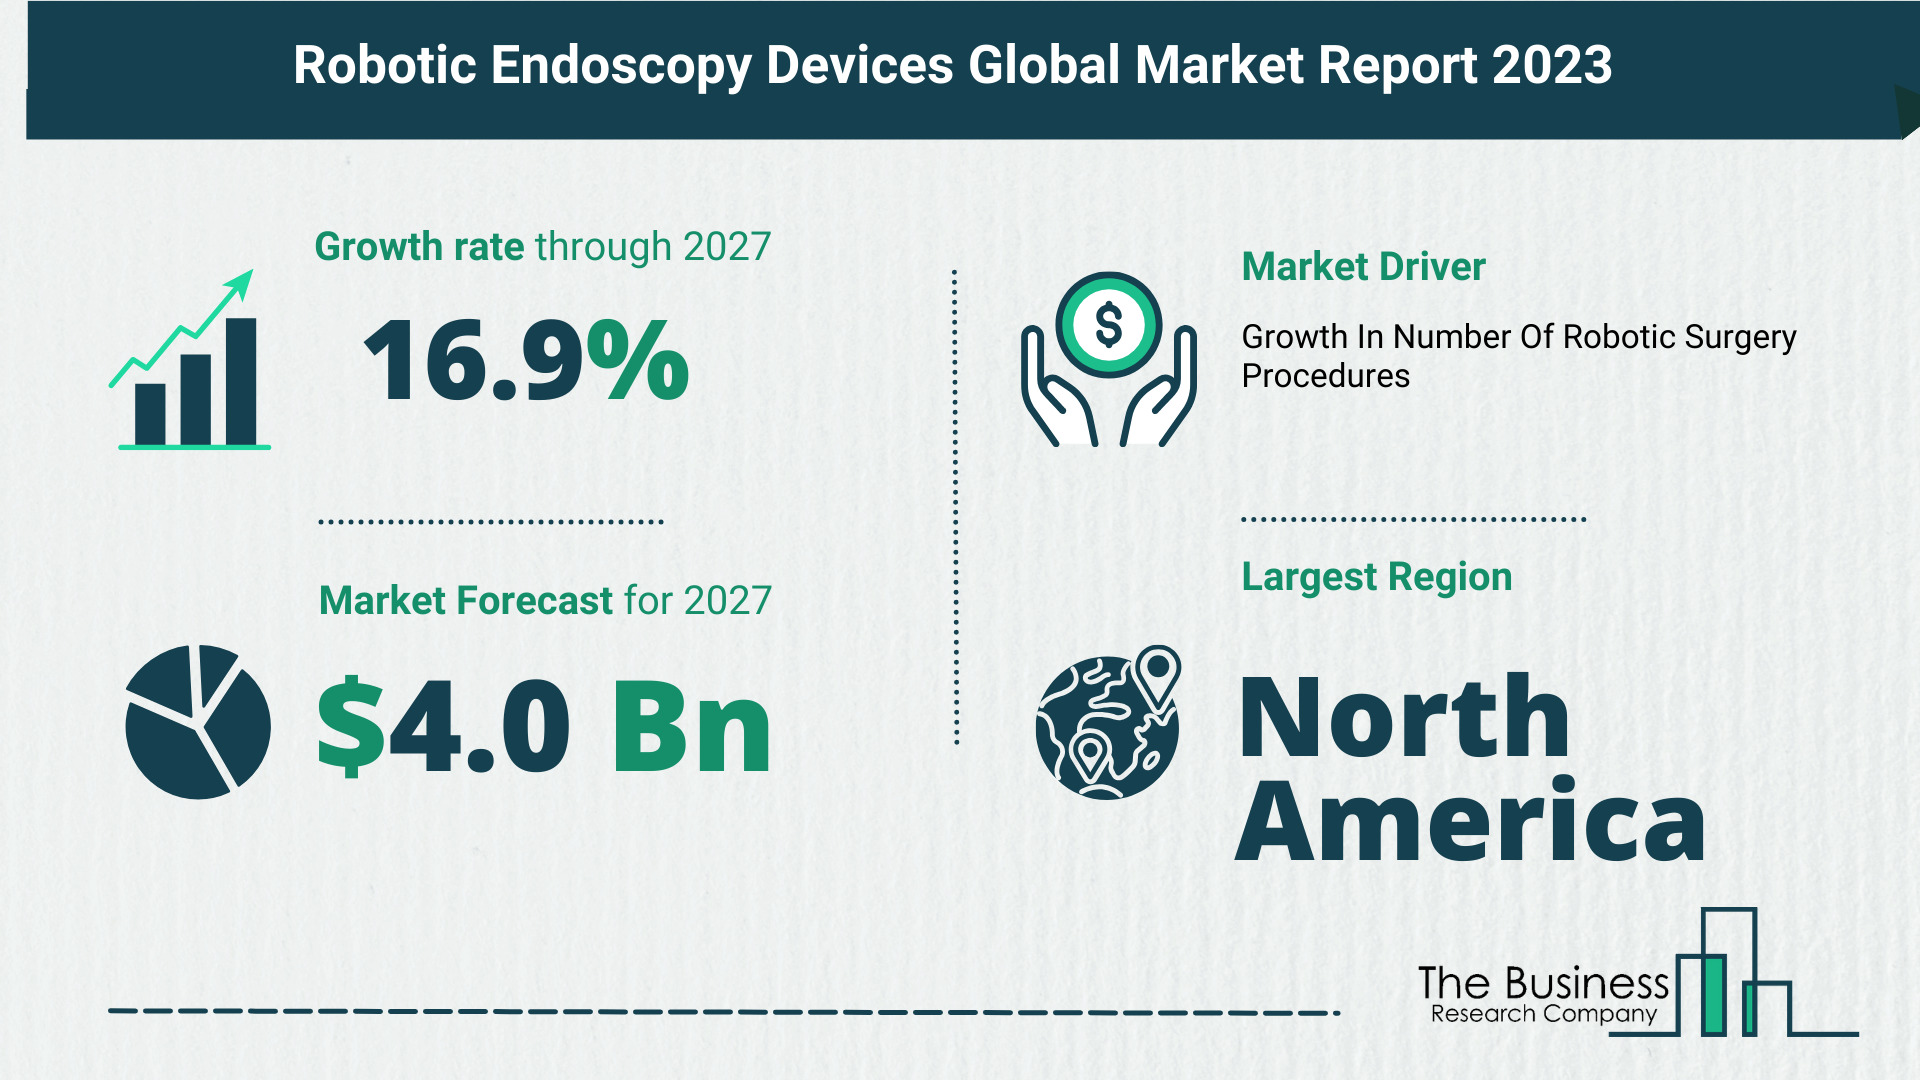 Global Robotic Endoscopy Devices Market Analysis 2023: Size, Share, And Key Trends